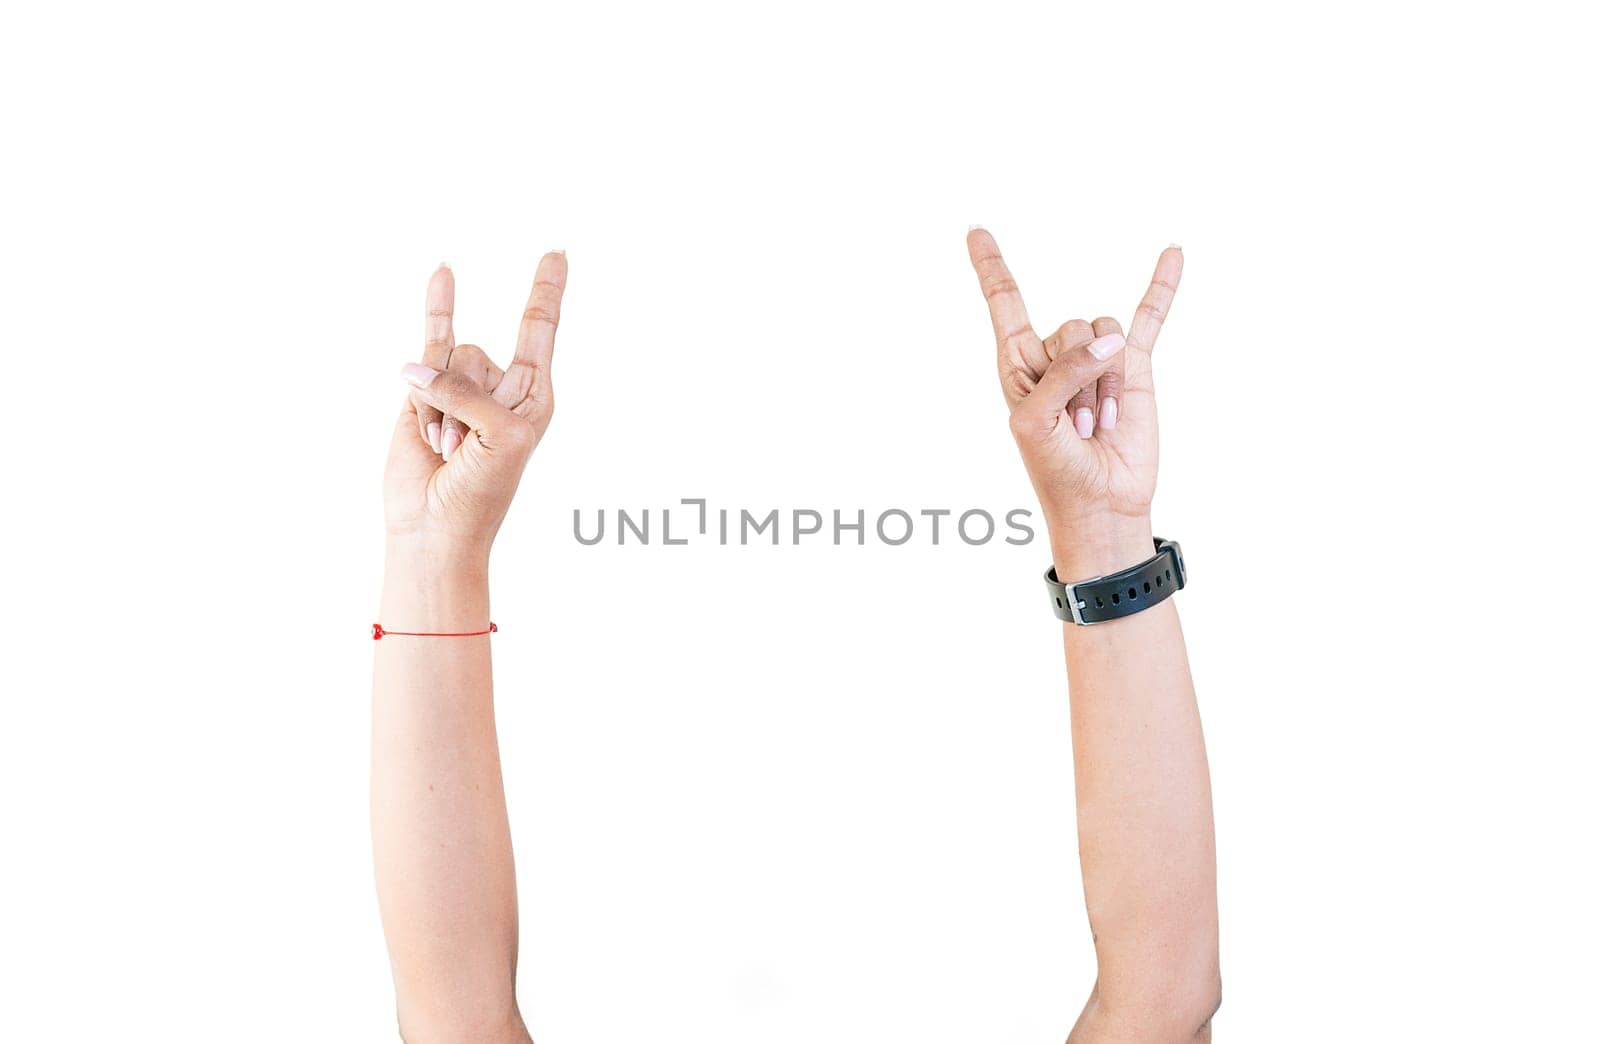 Hands making horns gesture isolated. Hands making rocknroll gesture by isaiphoto